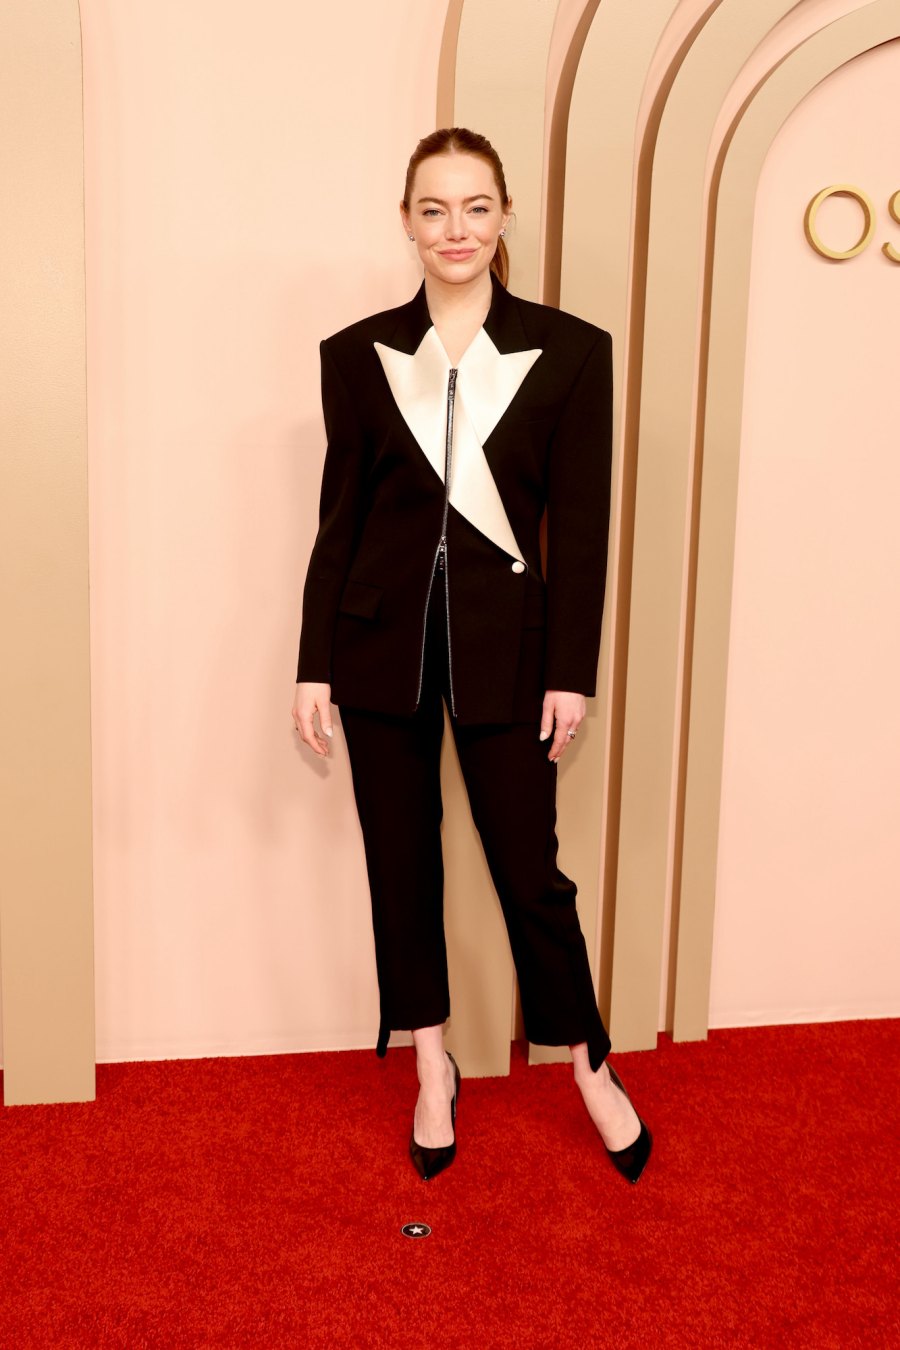 The Best Looks at the Oscars Luncheon